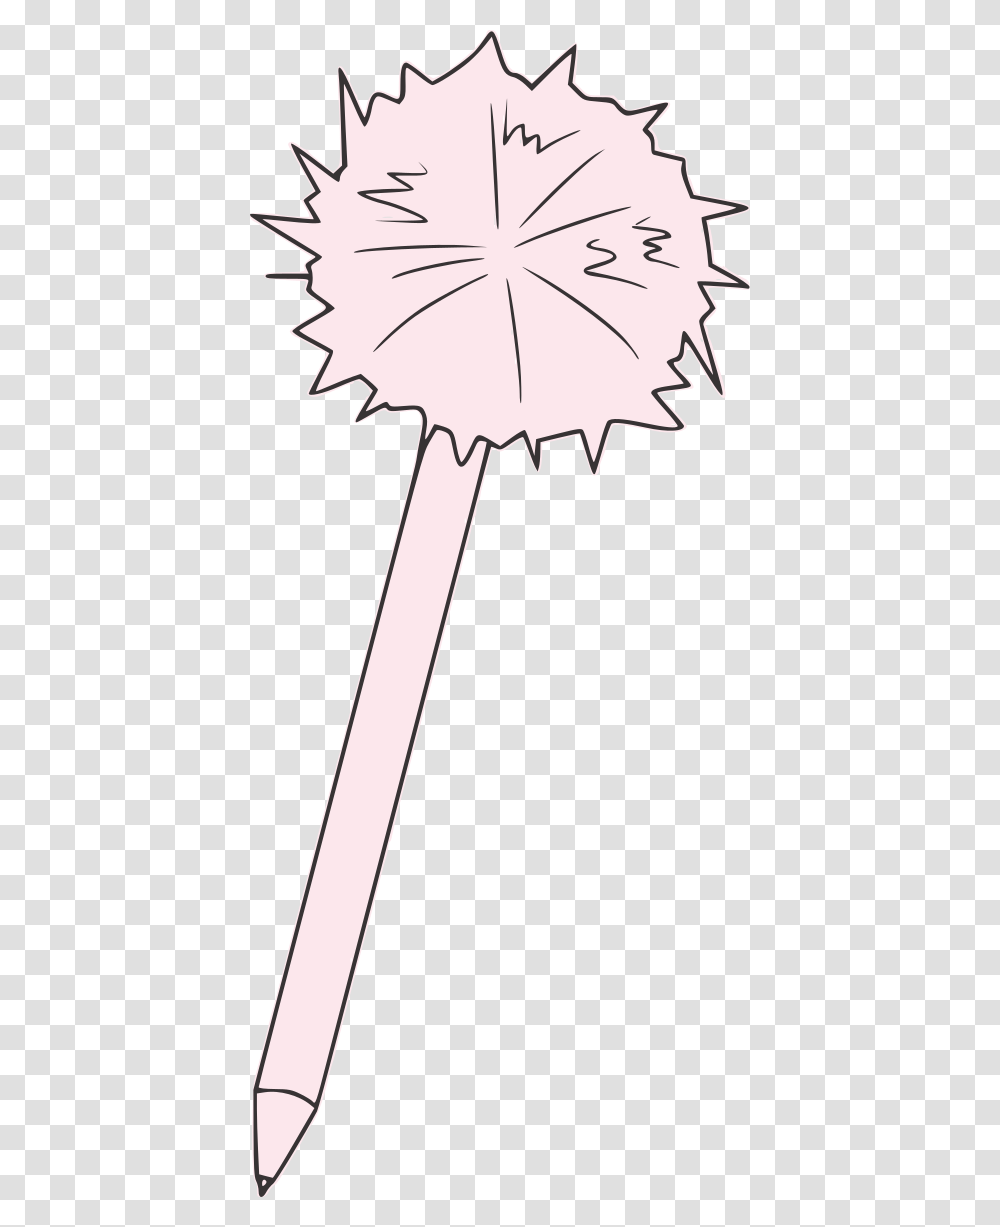 Clueless 7 Maple Leaf, Sword, Blade, Weapon, Weaponry Transparent Png